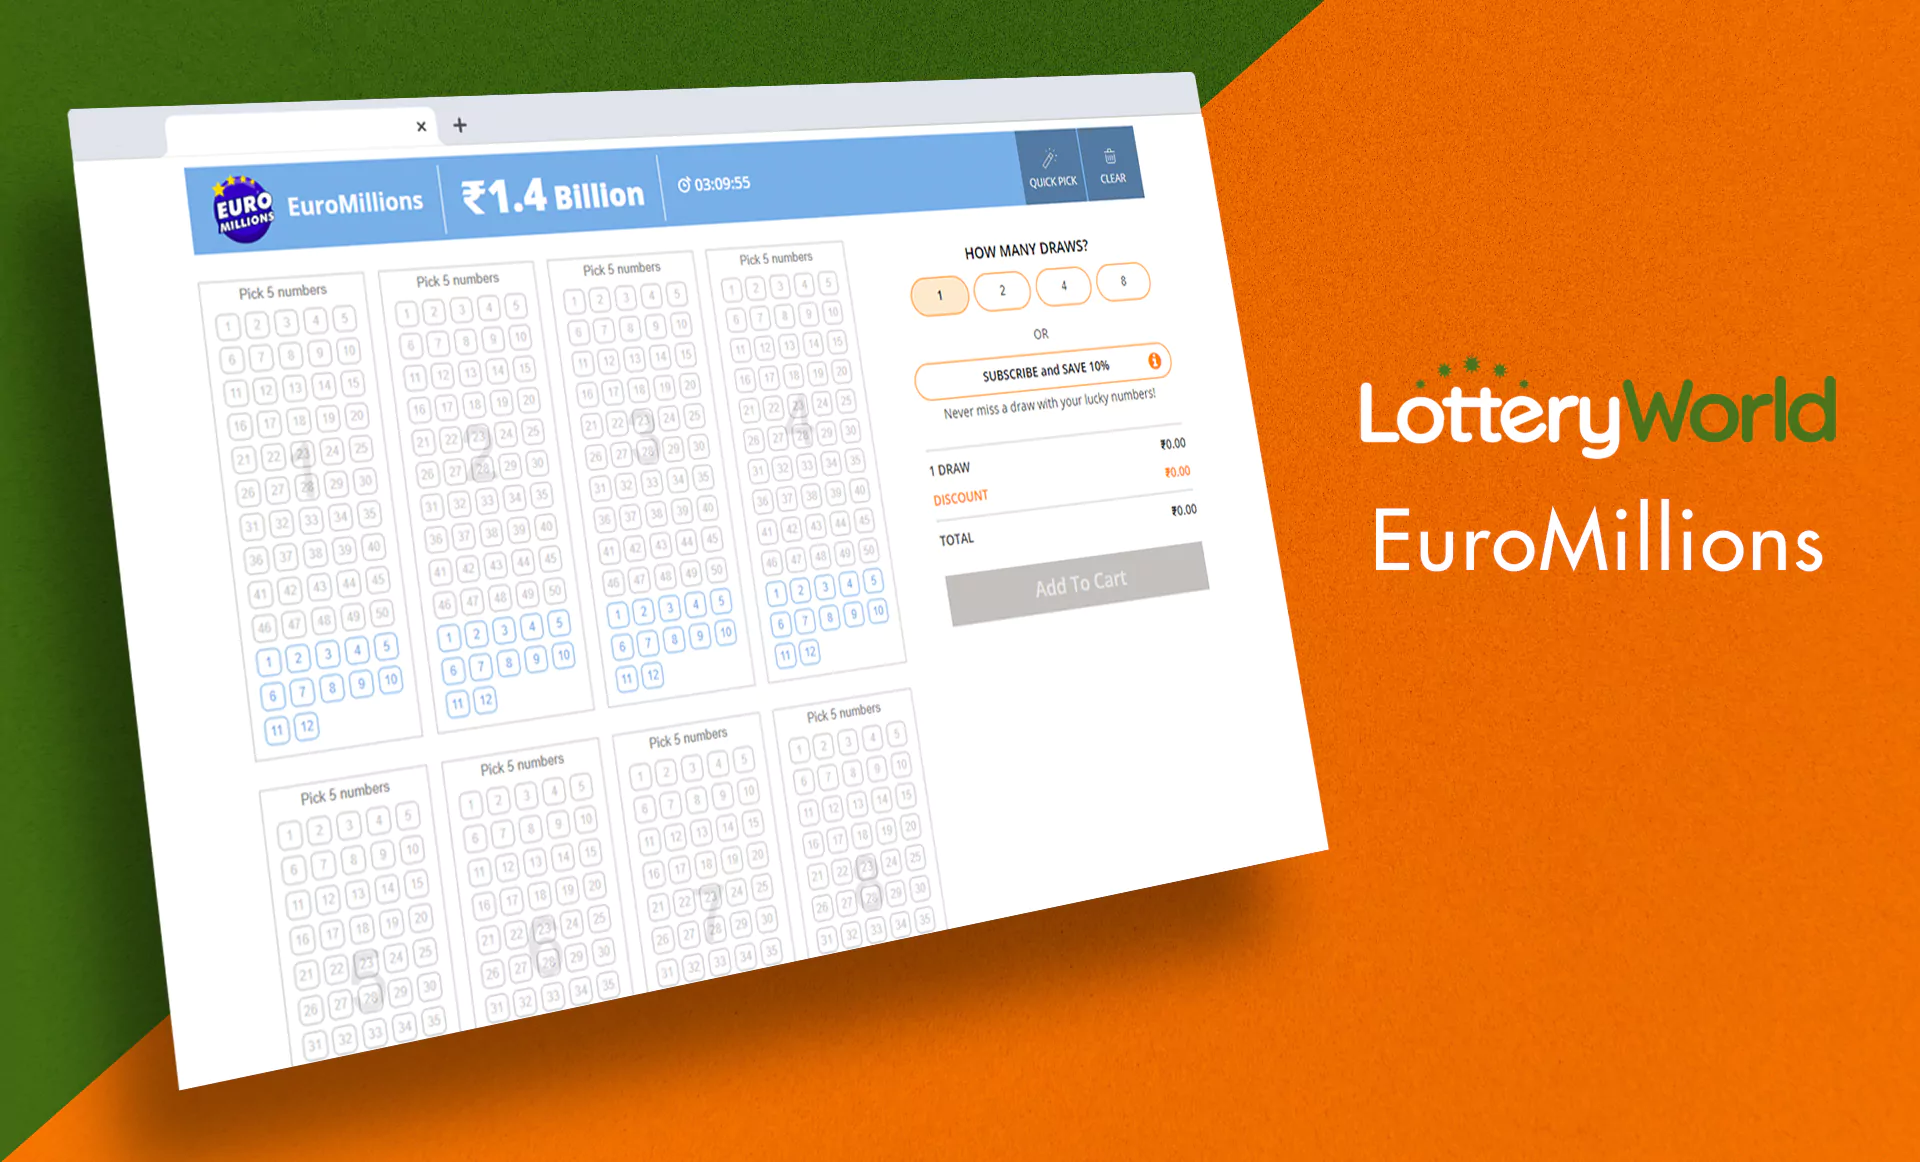 EuroMillions is another great lottery with a really huge jackpot.